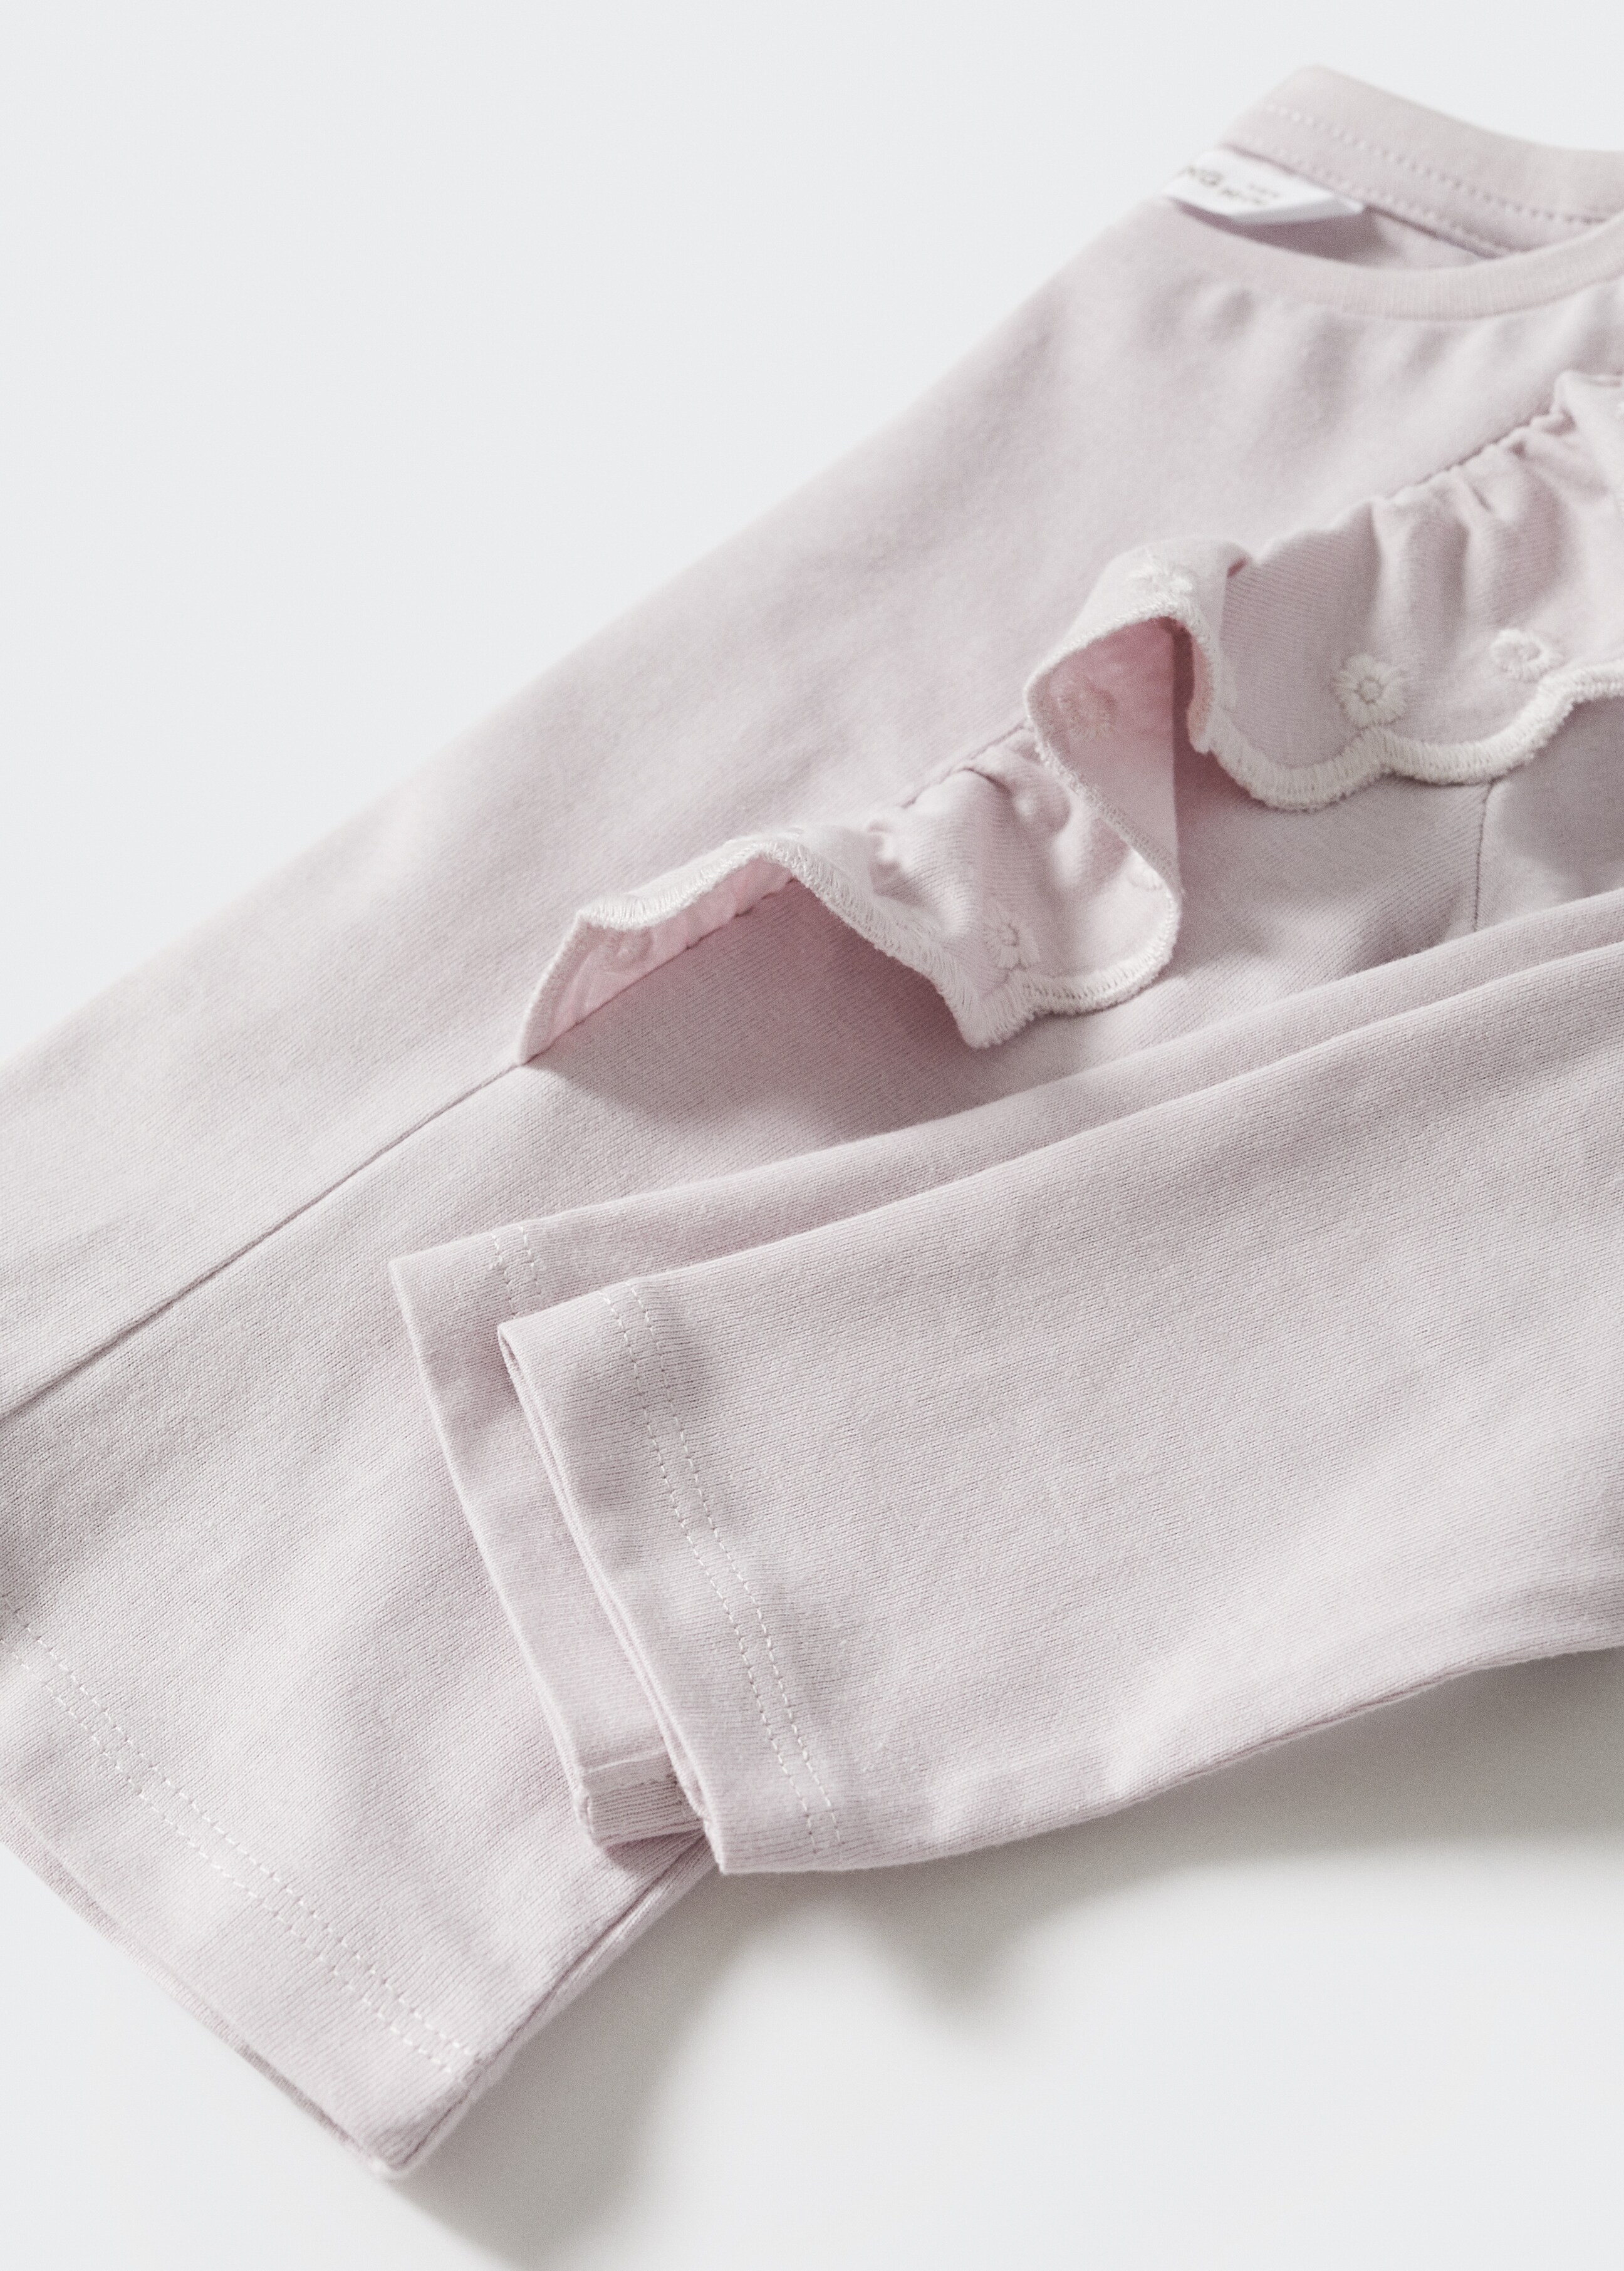 Ruffled cotton pyjamas - Details of the article 9